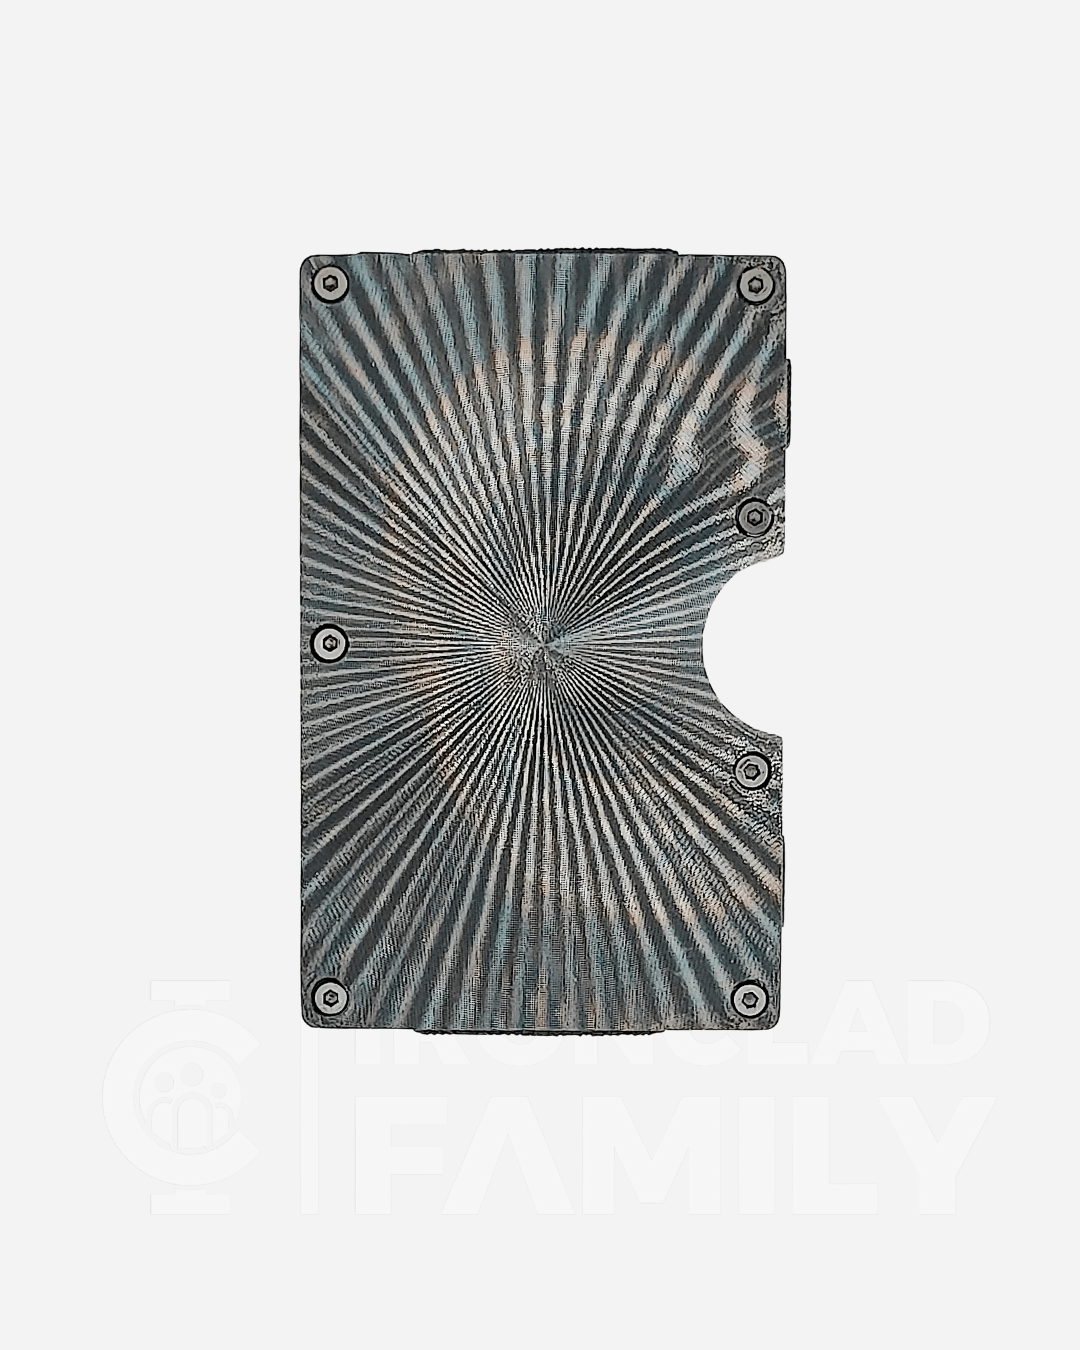 Close-up of the spiral design on the textured metal RFID blocking wallet